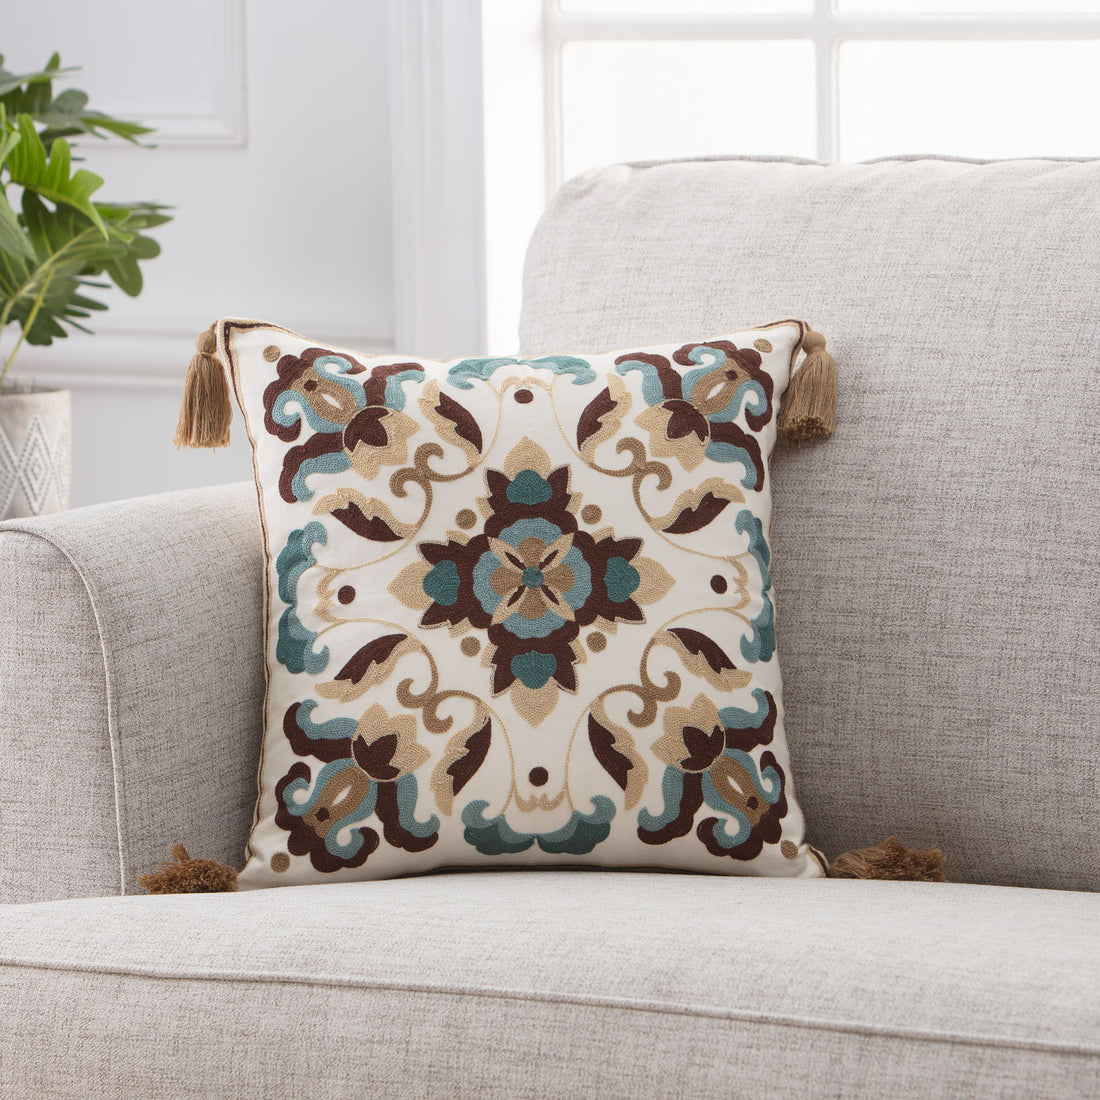 Dorelia Embroidered Throw Pillow Covers